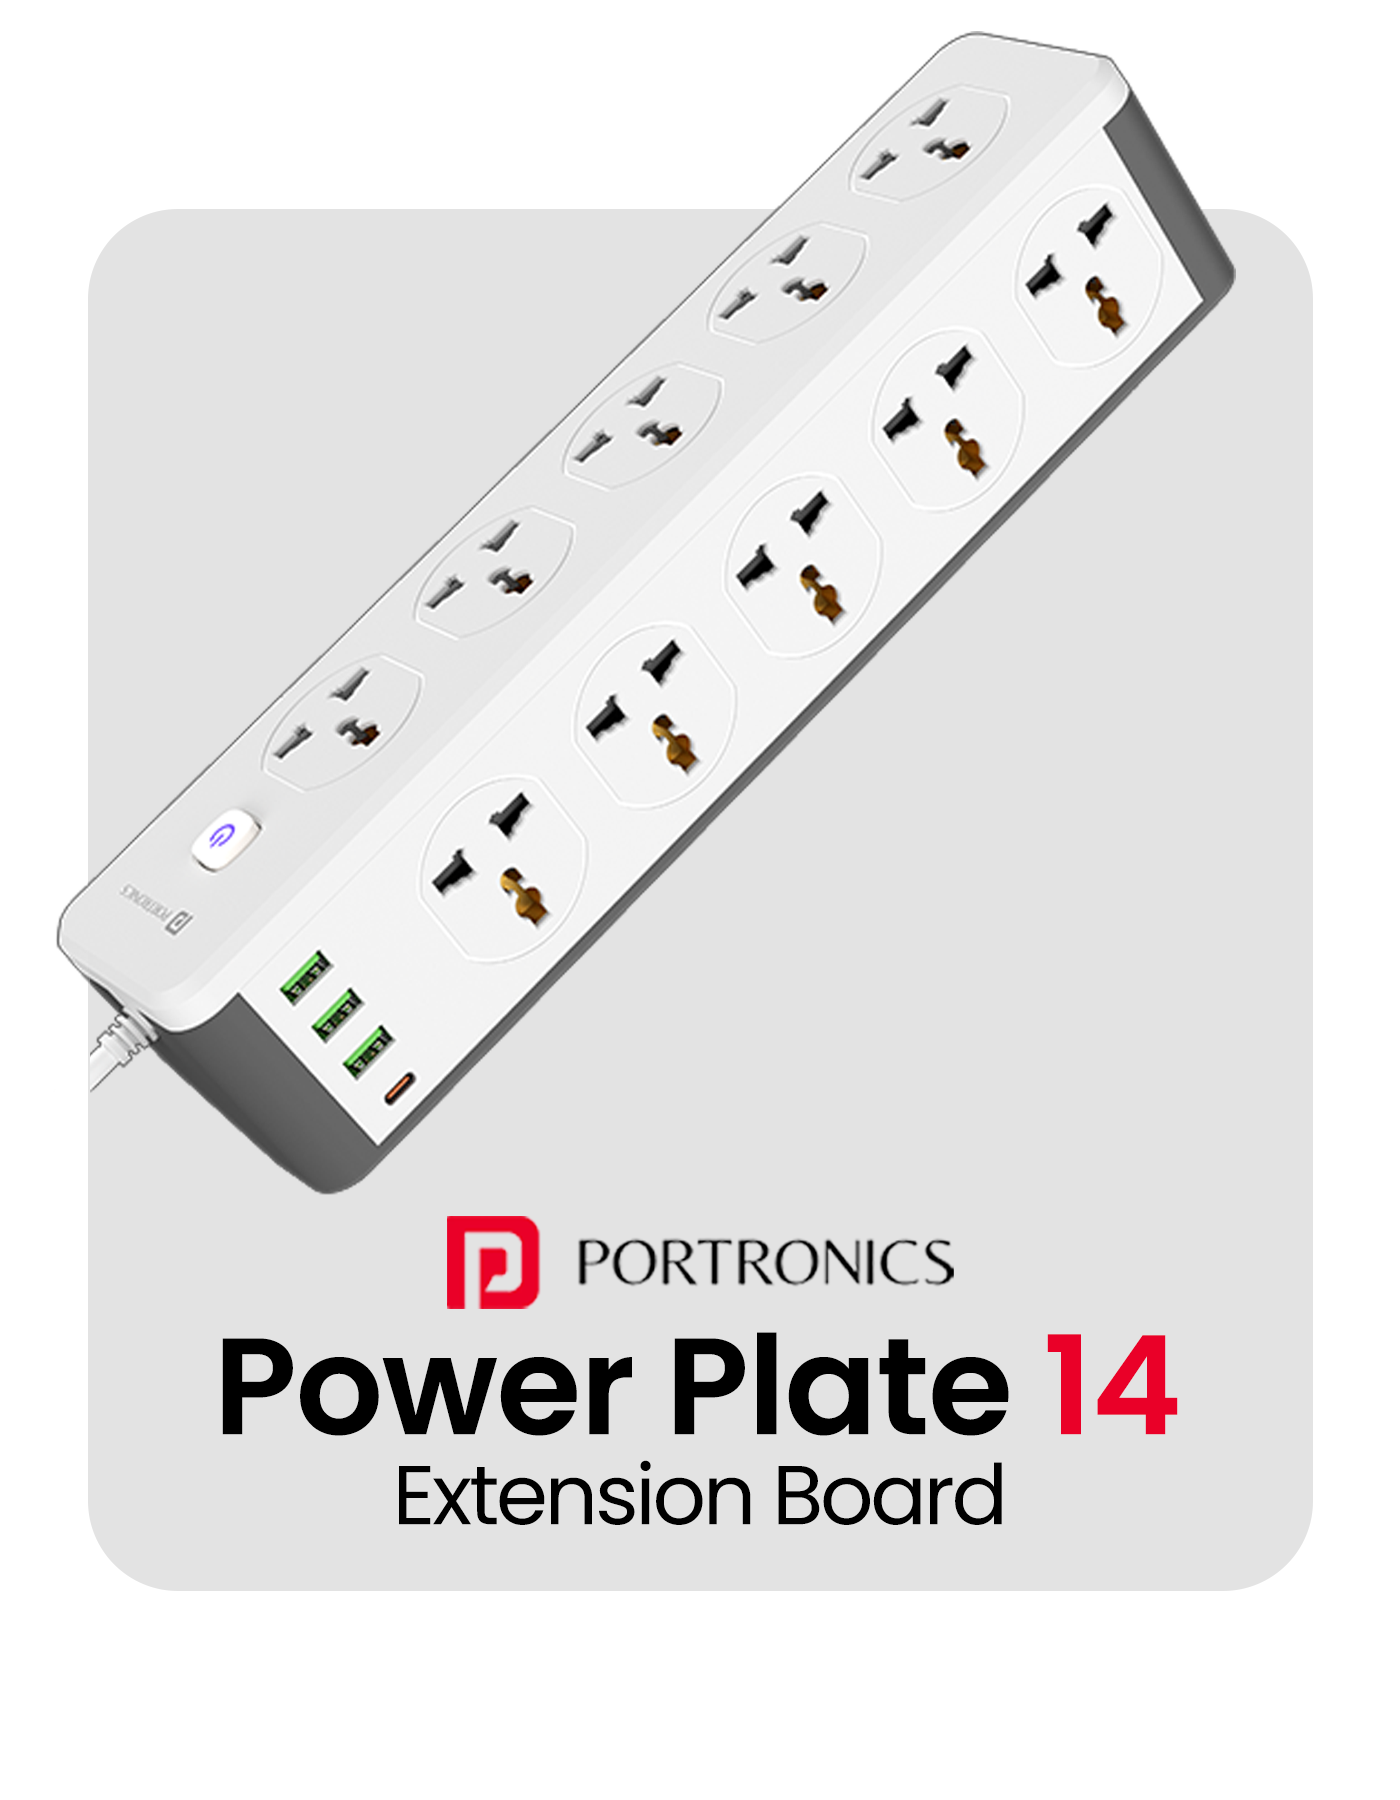 Portronics Power Plate 14 Power Extension Board with 3M durable cable